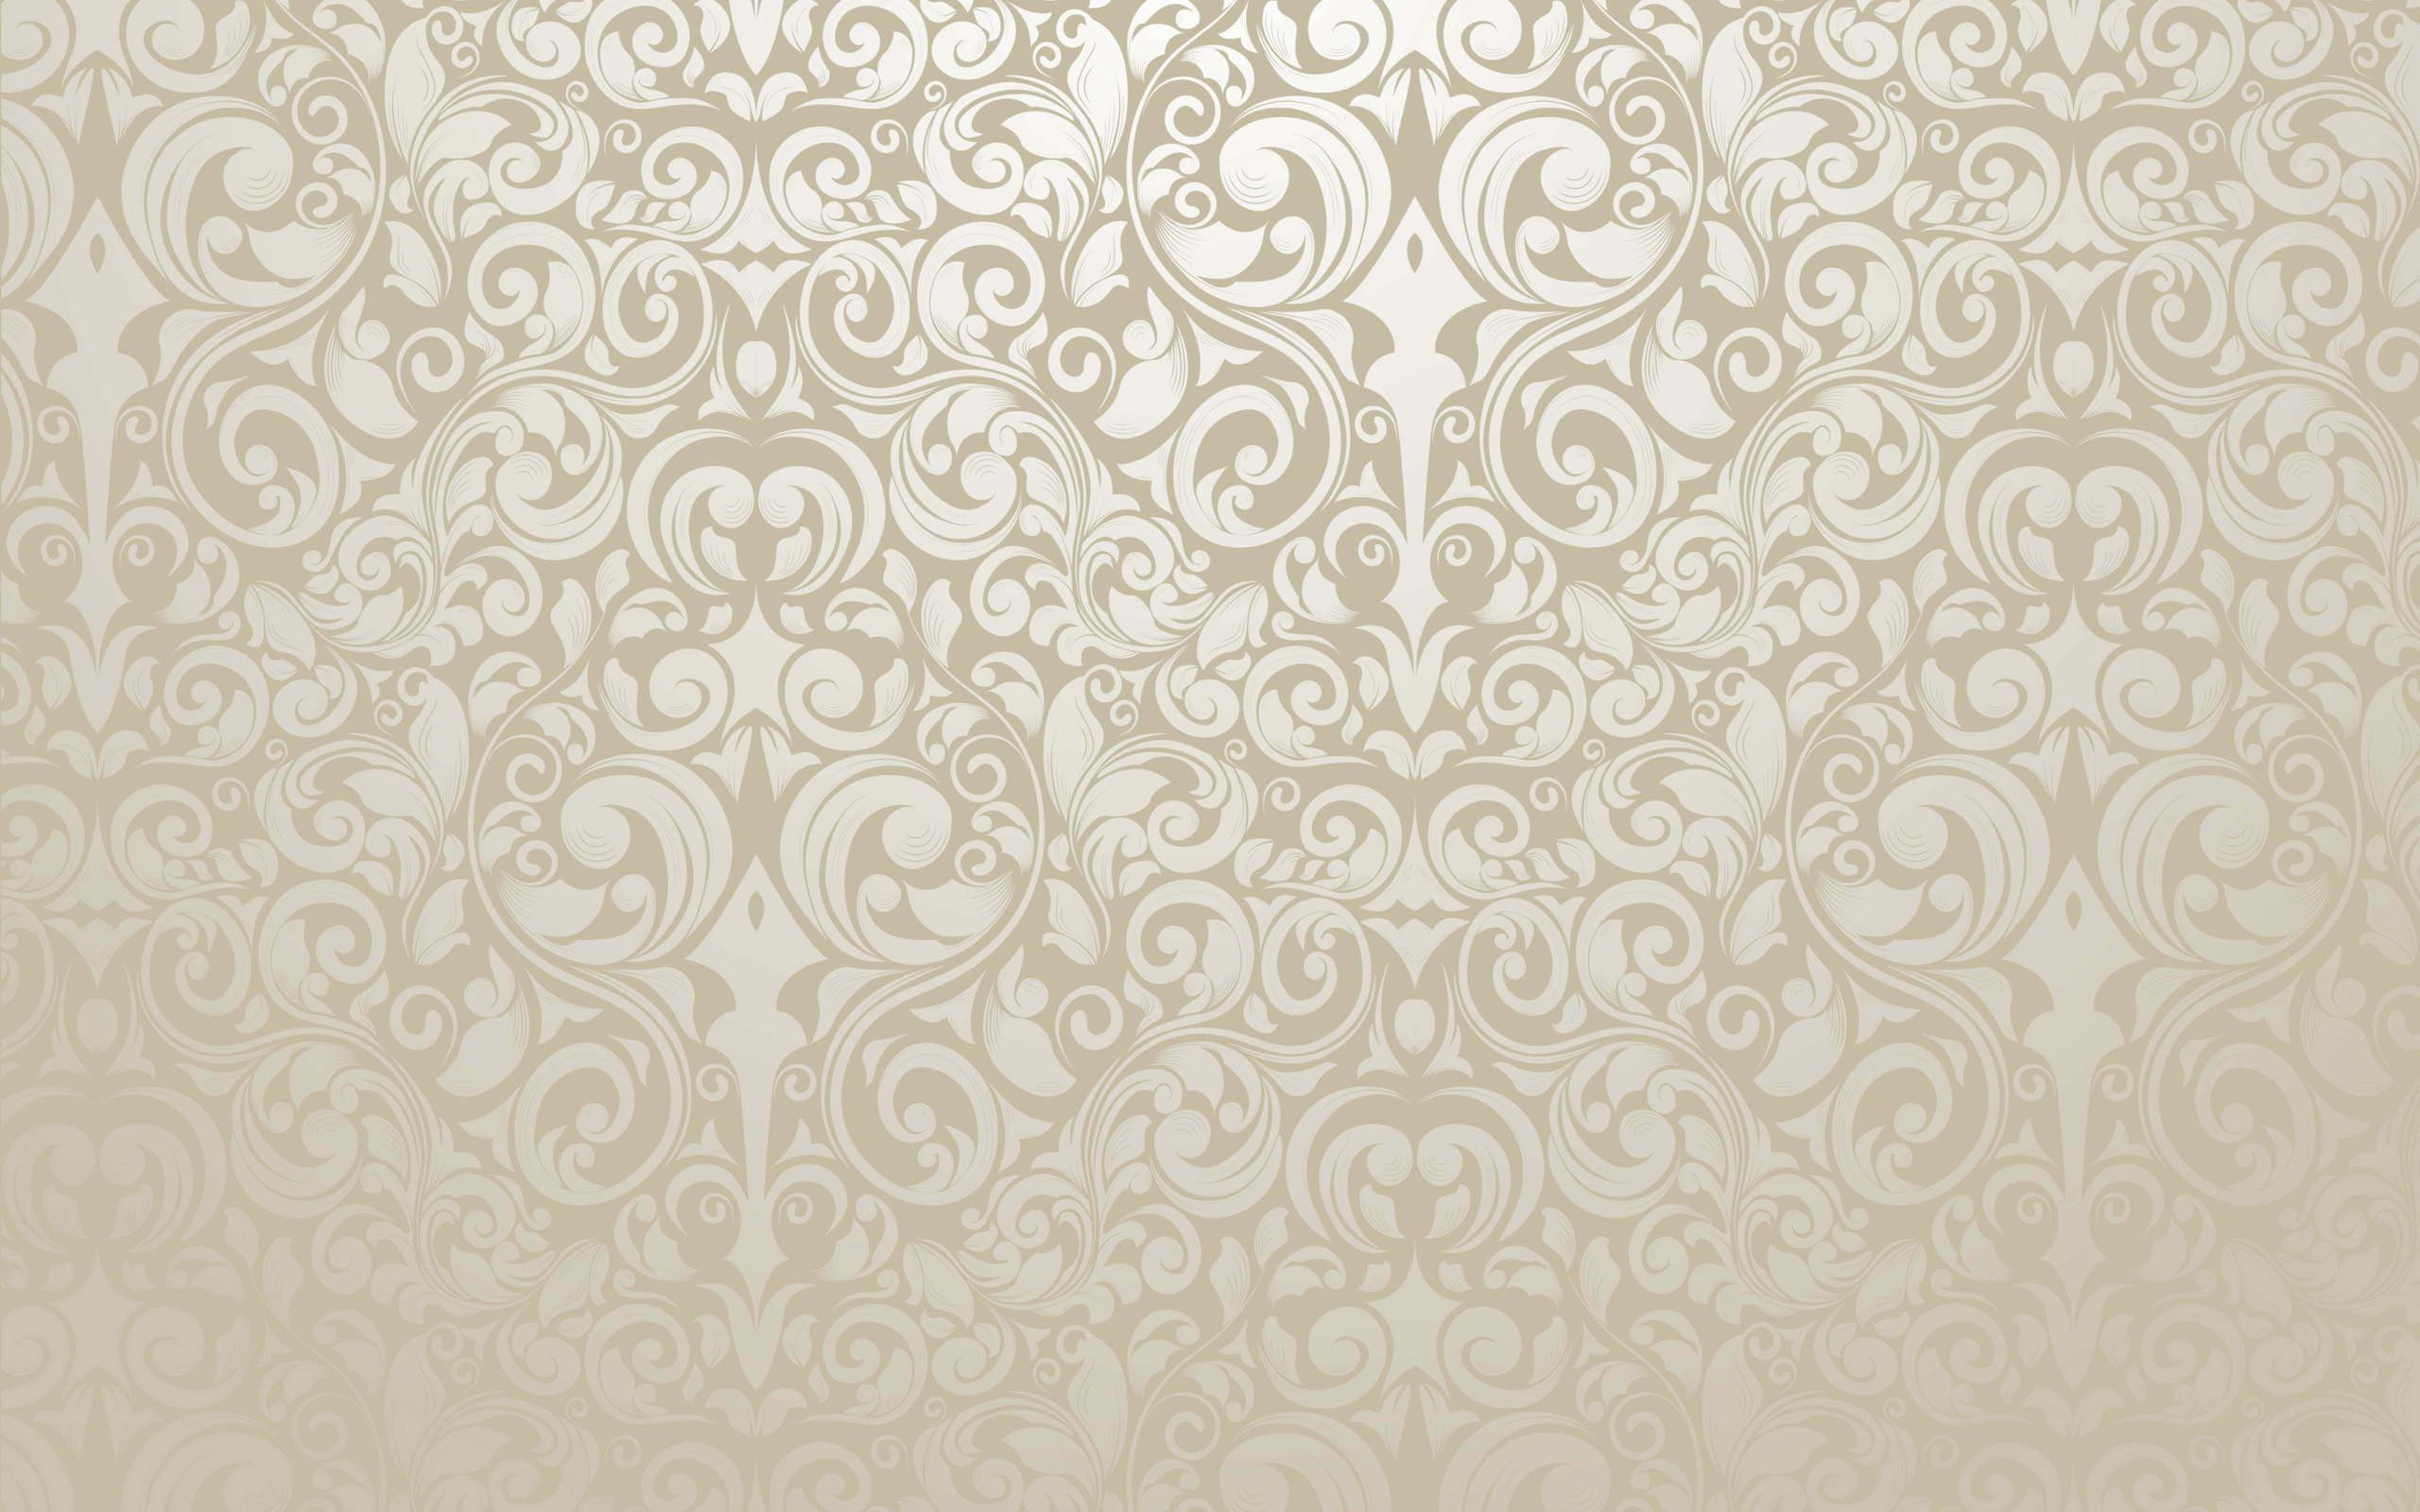 Pattern HD Wallpaper In Gold Color For Card Design